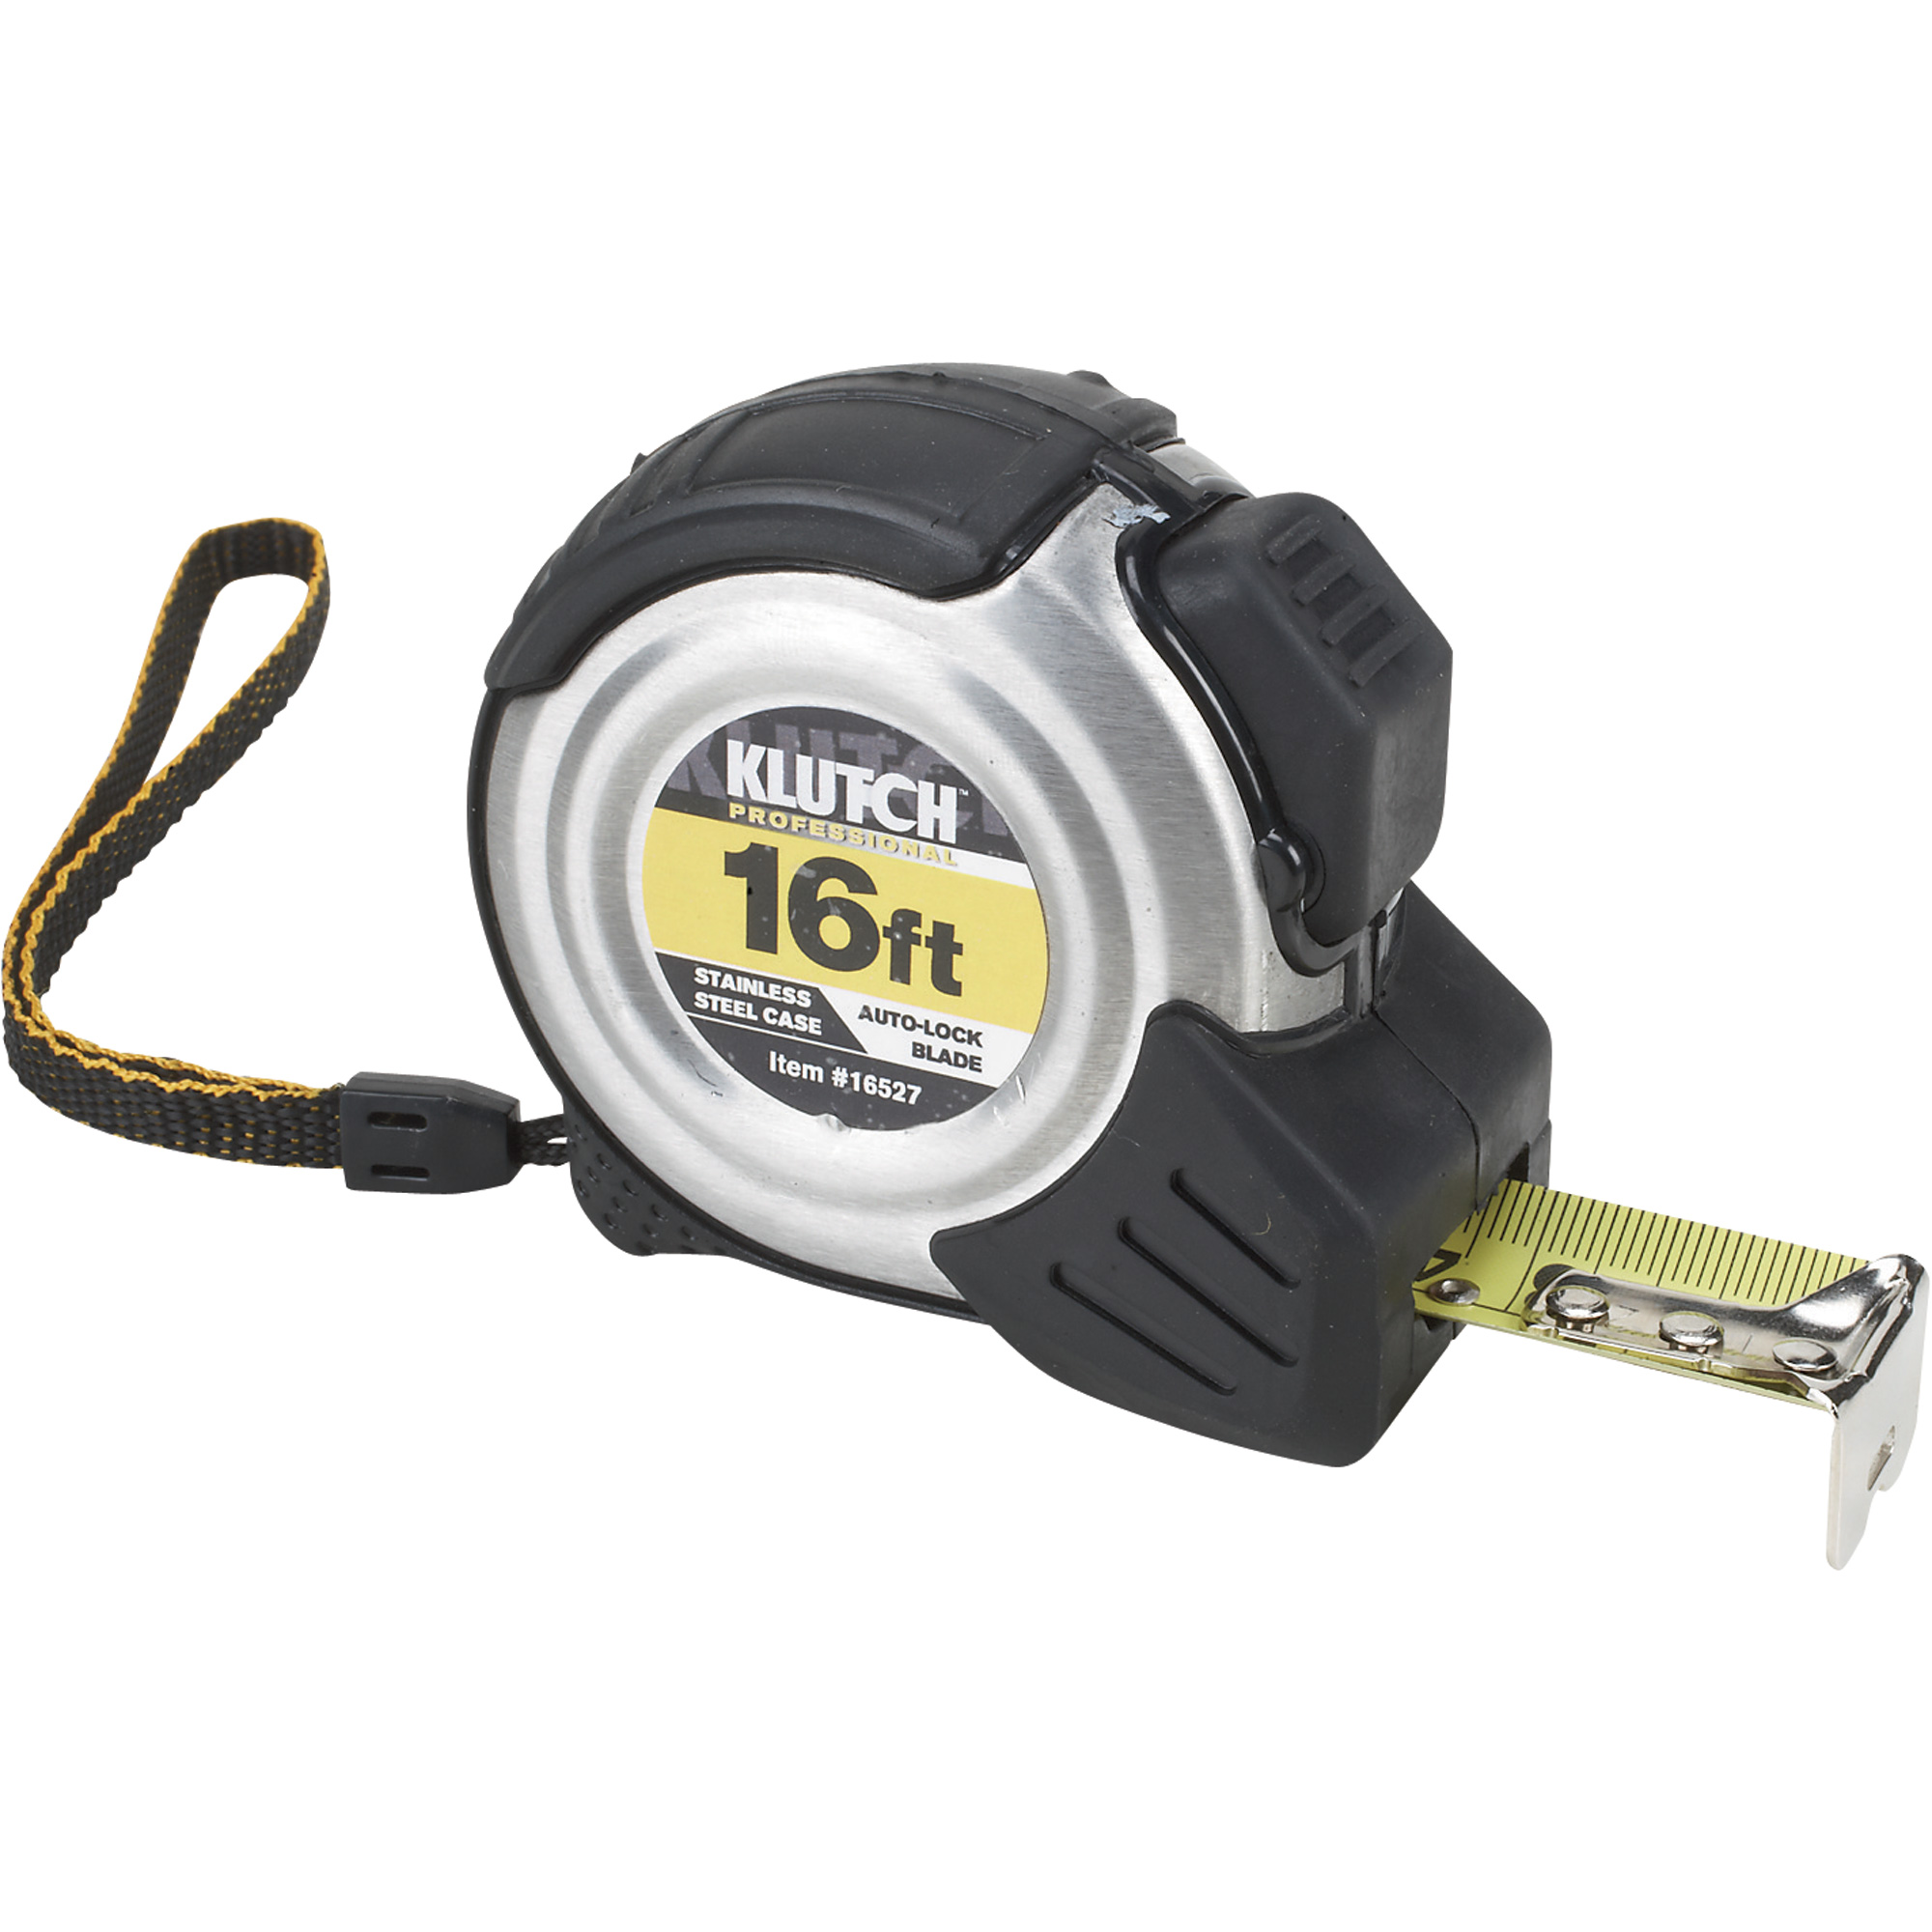 Klutch Stainless Steel Tape Measure — 1in. x 16-Ft. | Northern Tool ...